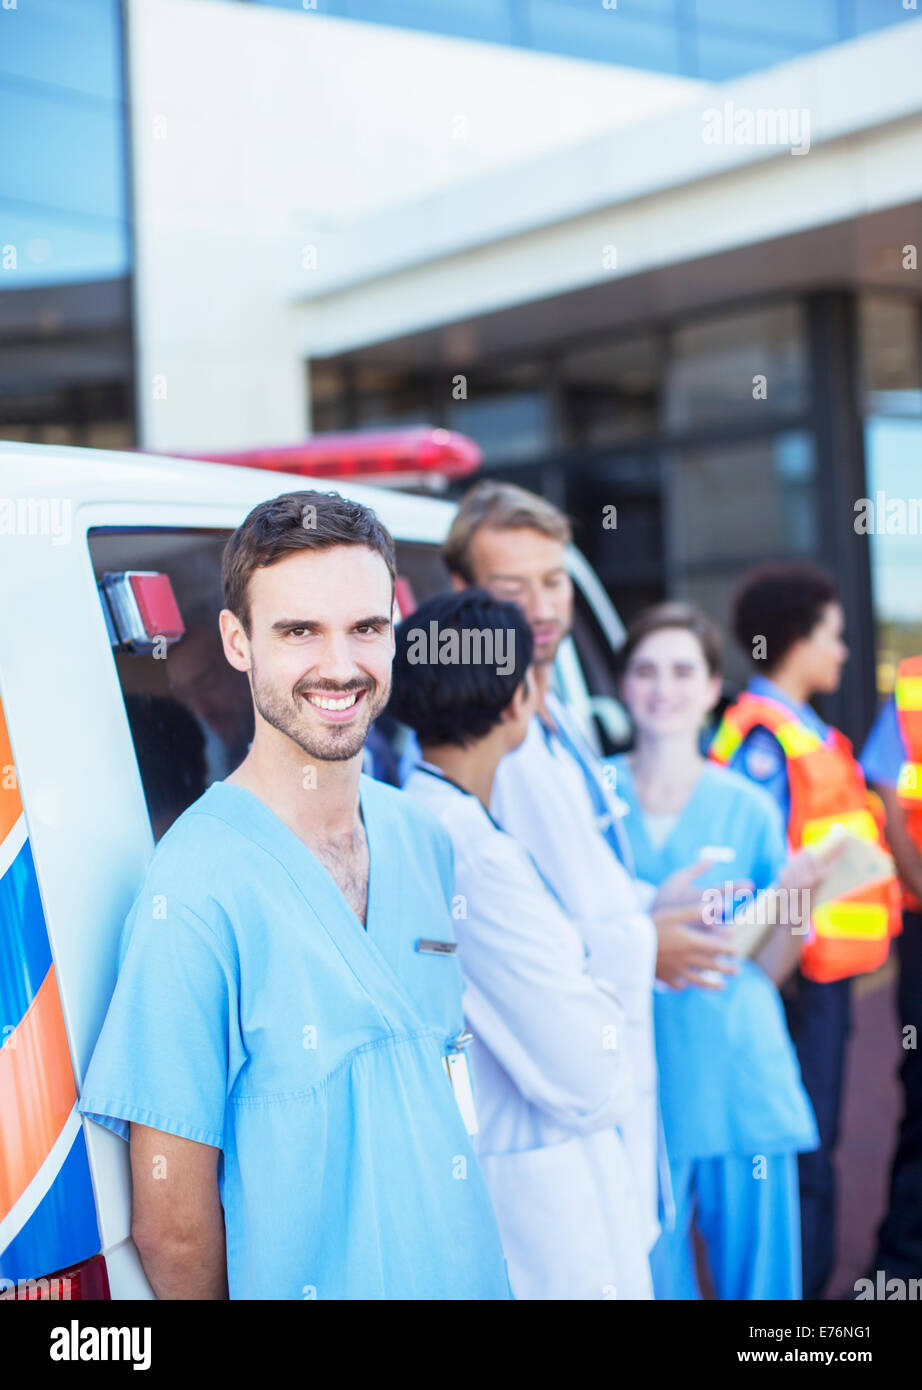 Nurse smiling by ambulance in hospital parking lot Stock Photo